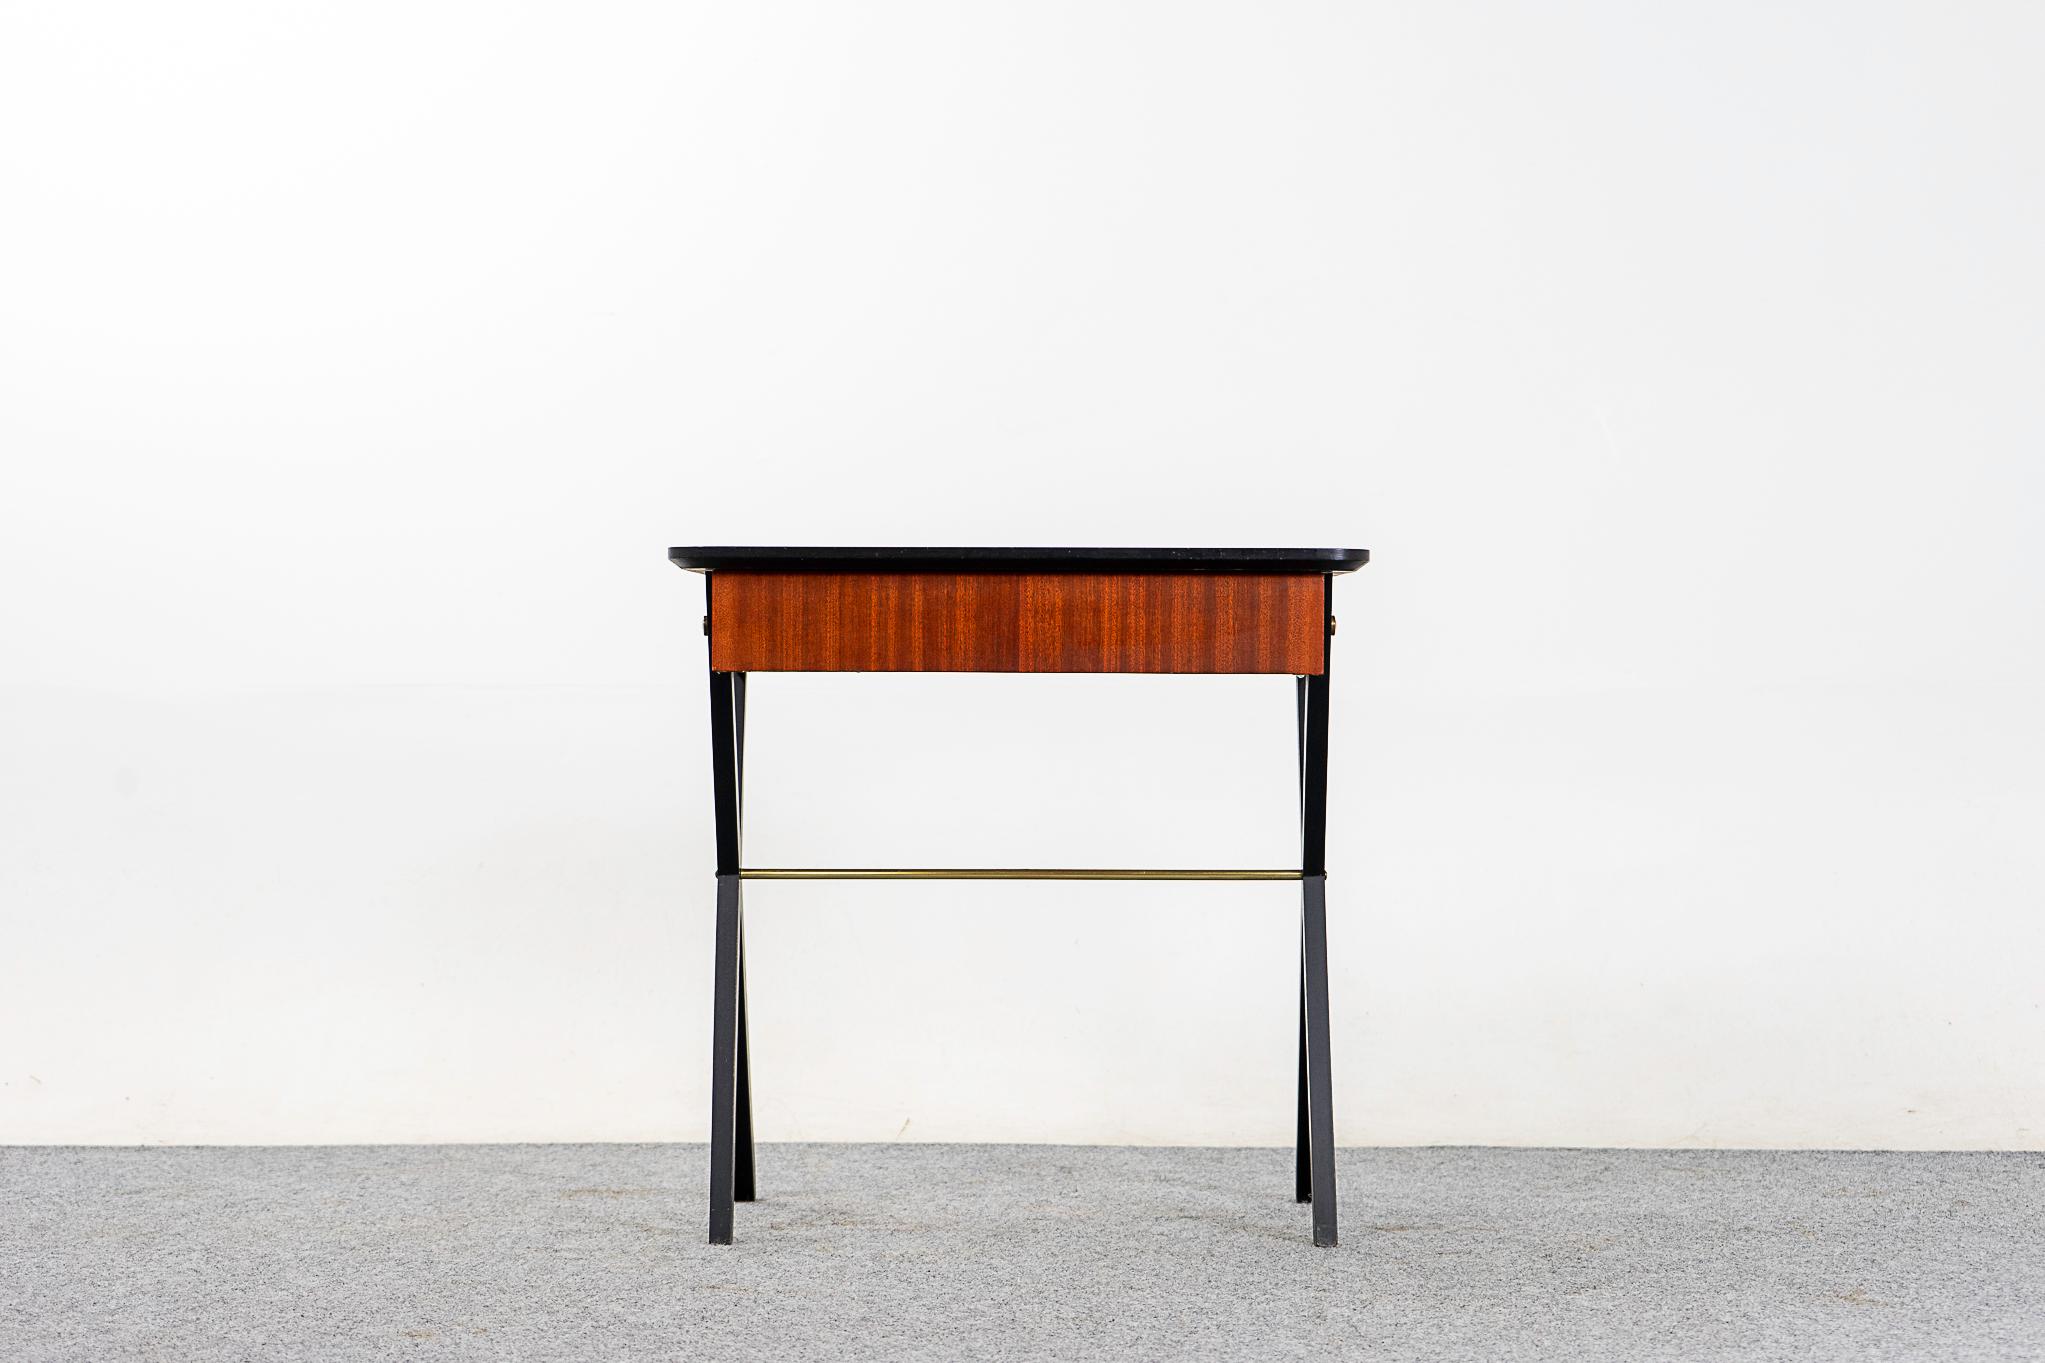 Mahogany midcentury side table, circa 1970s. Beautifully veneered case rests on slender, striking black contrasting X-crossed legs with polished metal support. Beautiful rounded edges and metal details, sleek drawer for your assorted sundries.